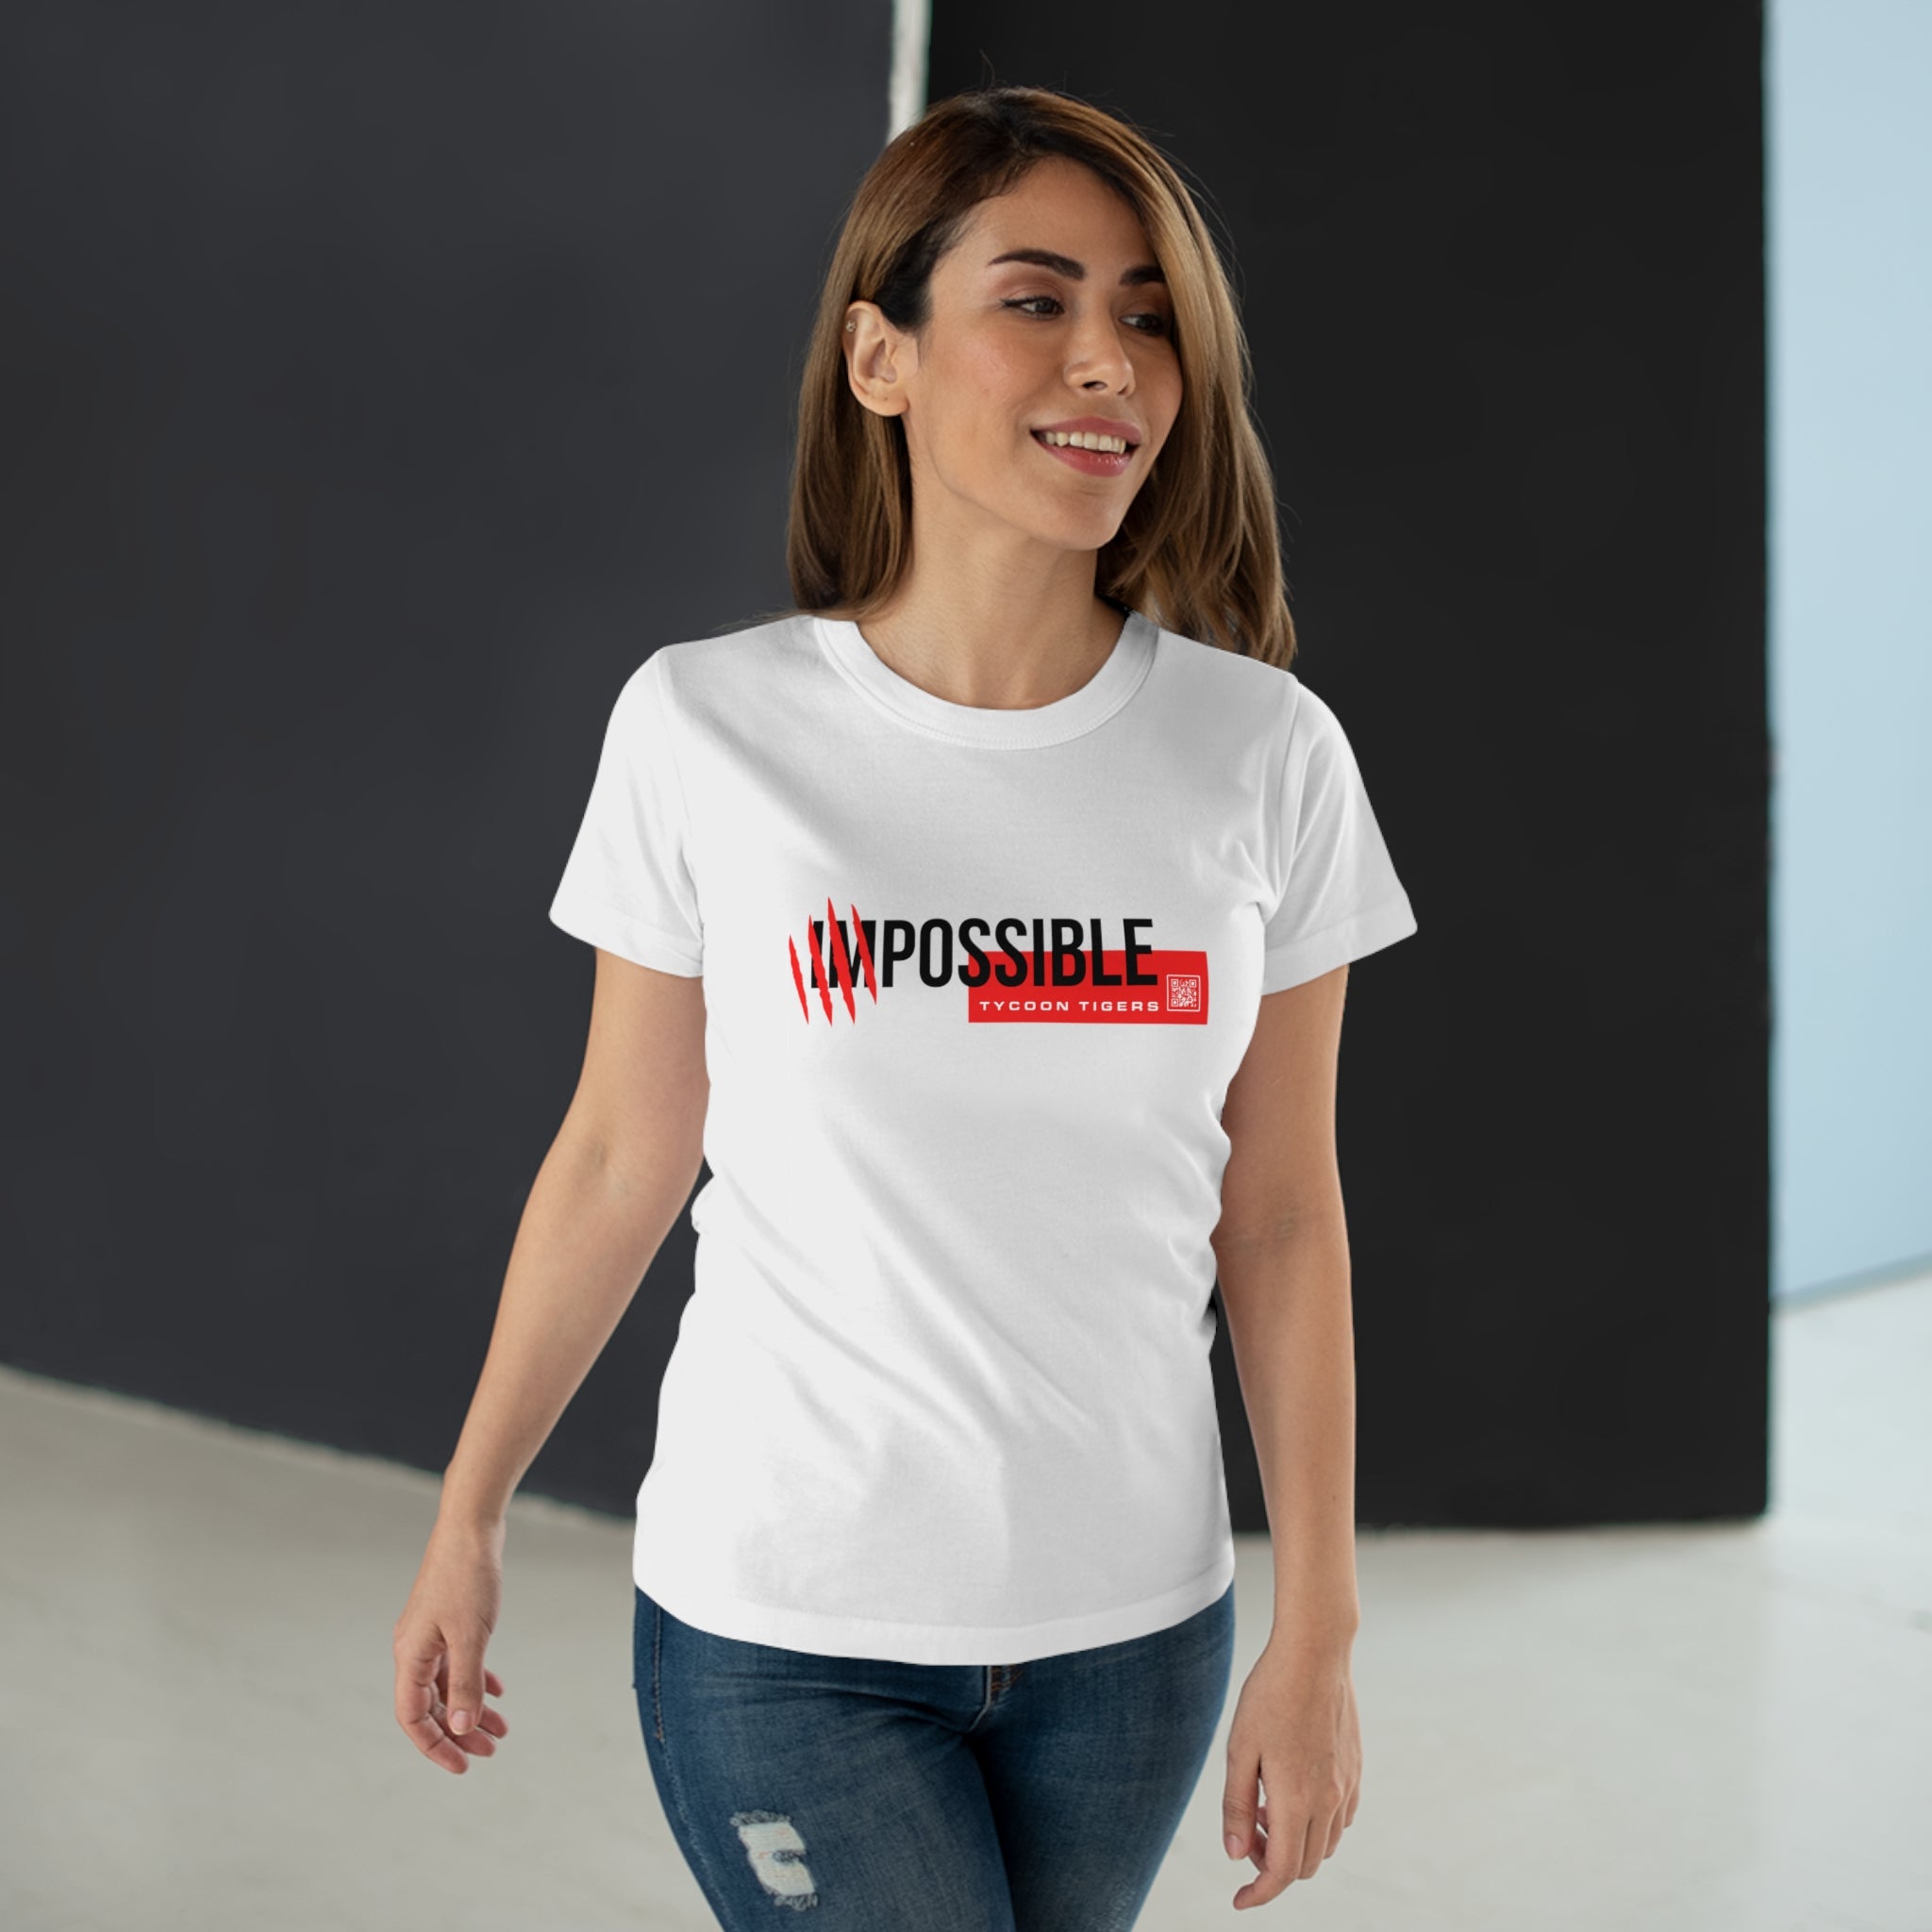 Impossible - T-Shirt